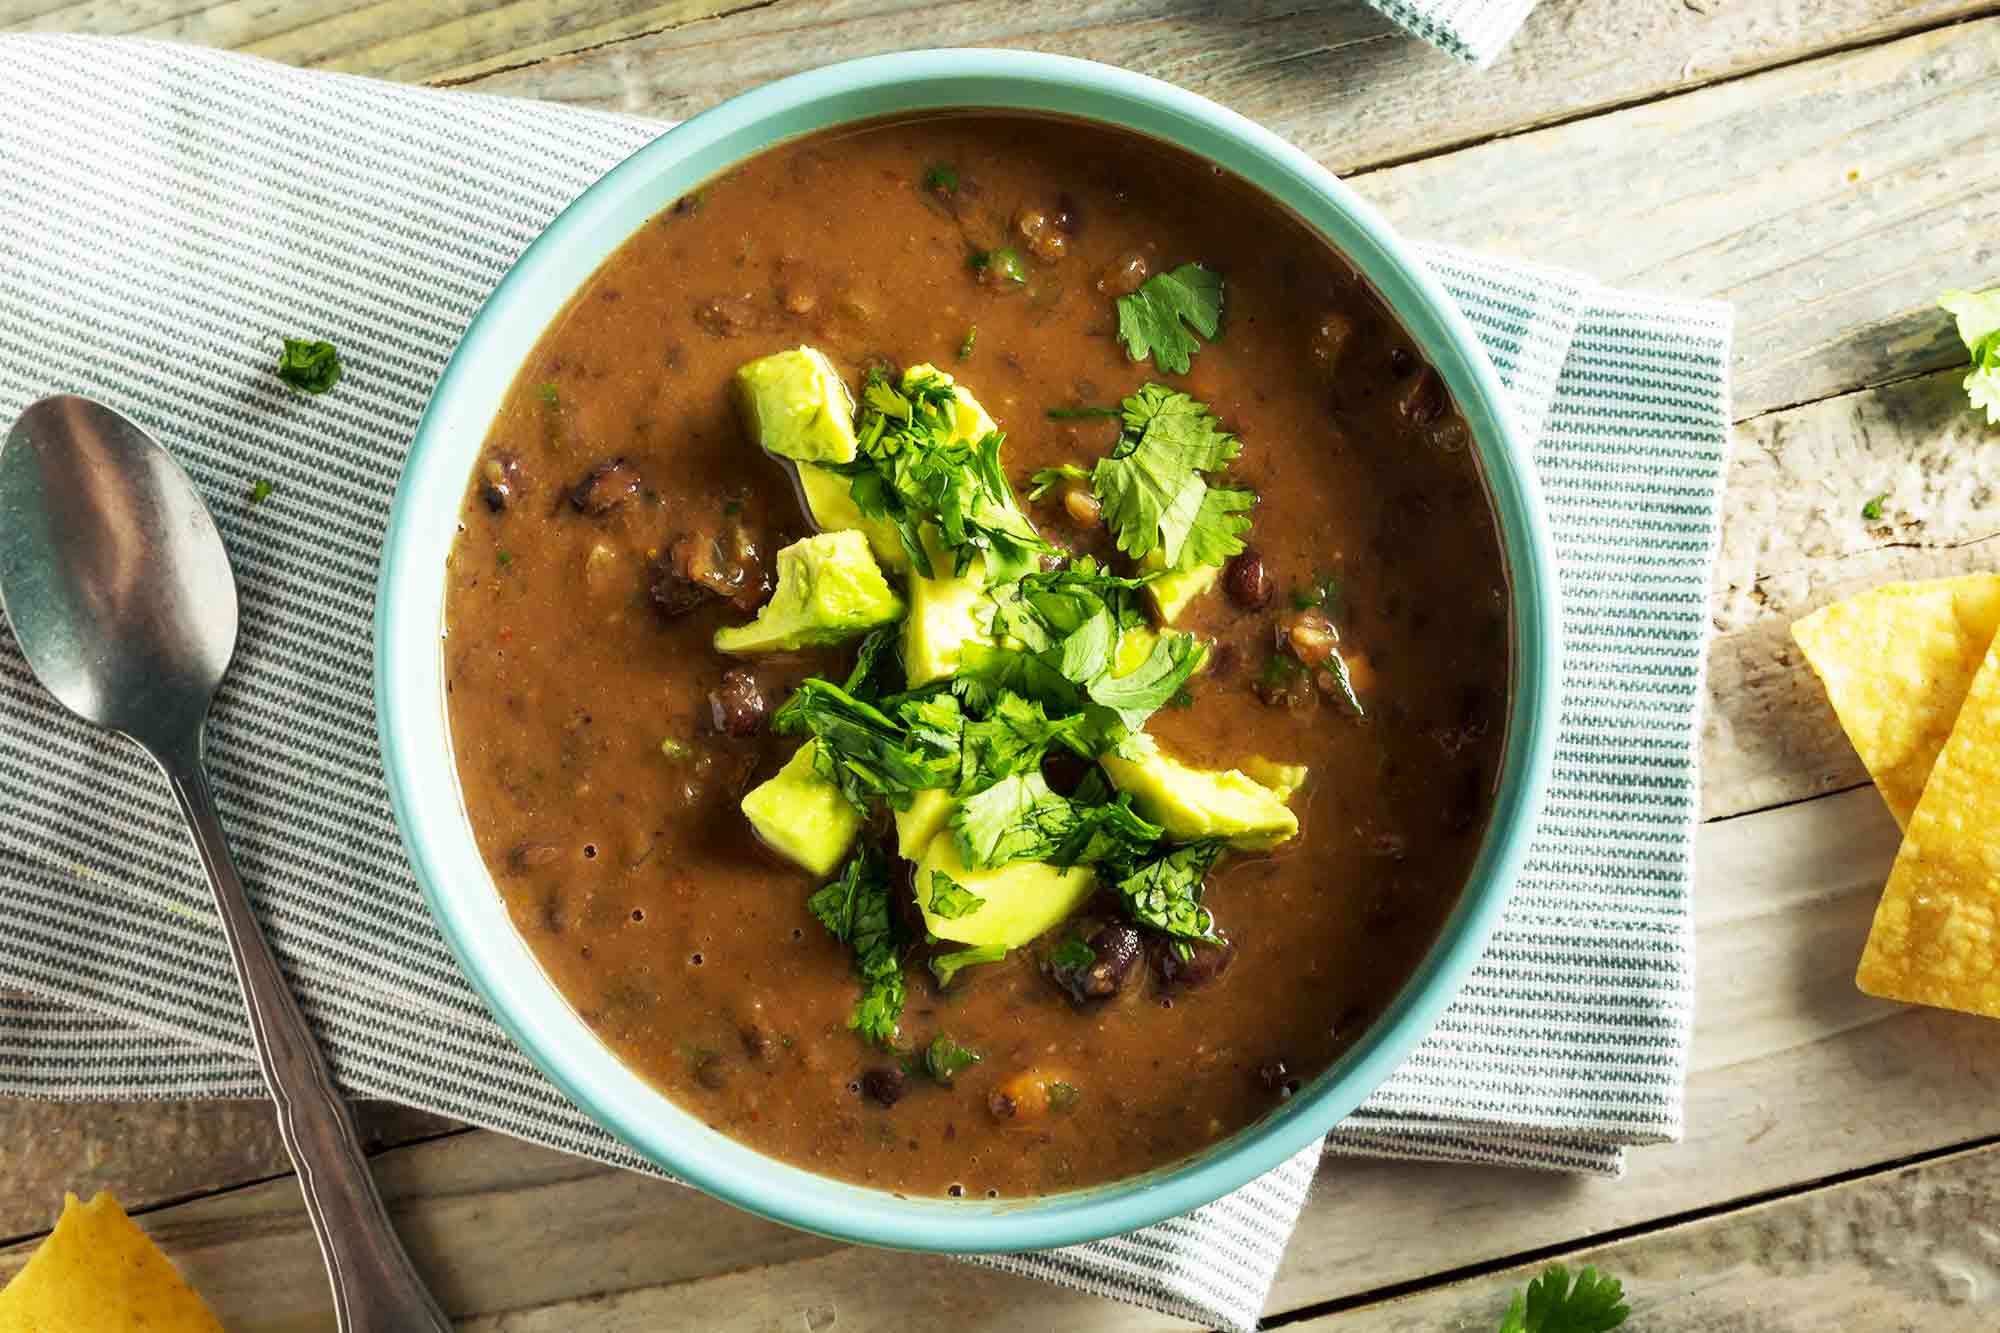 Spicy Black Bean Soup Recipe - How To Make Recipes